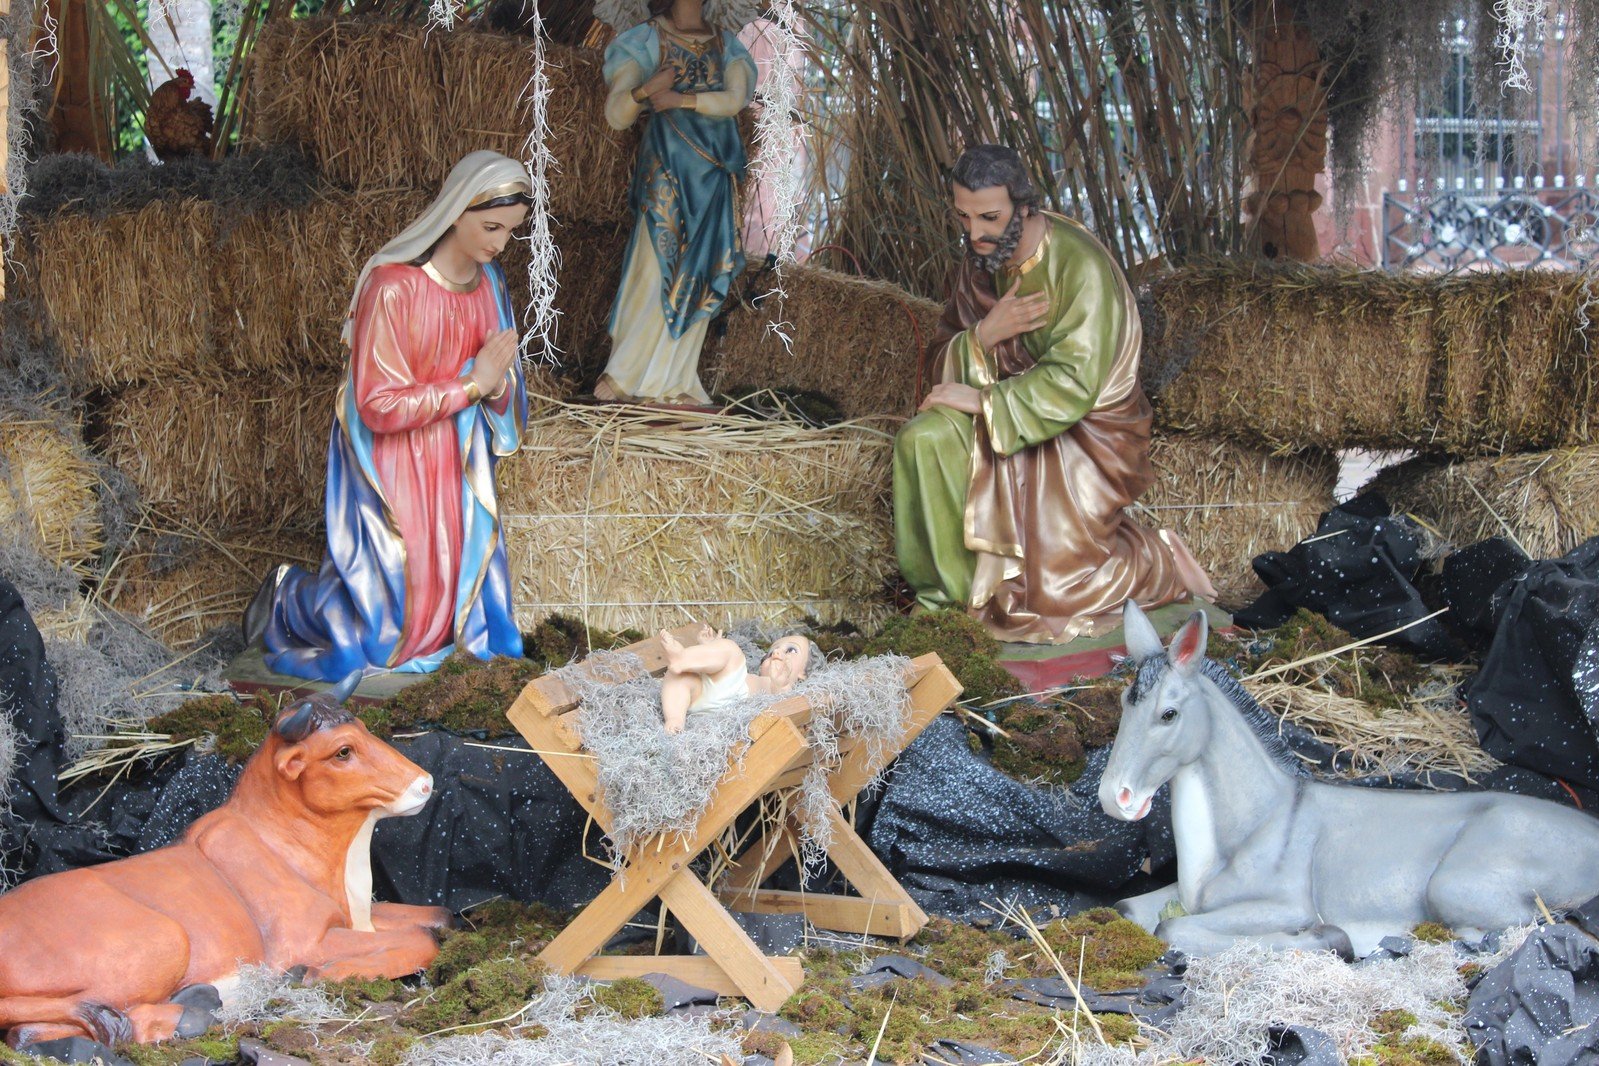 a nativity scene with figurines and a donkey